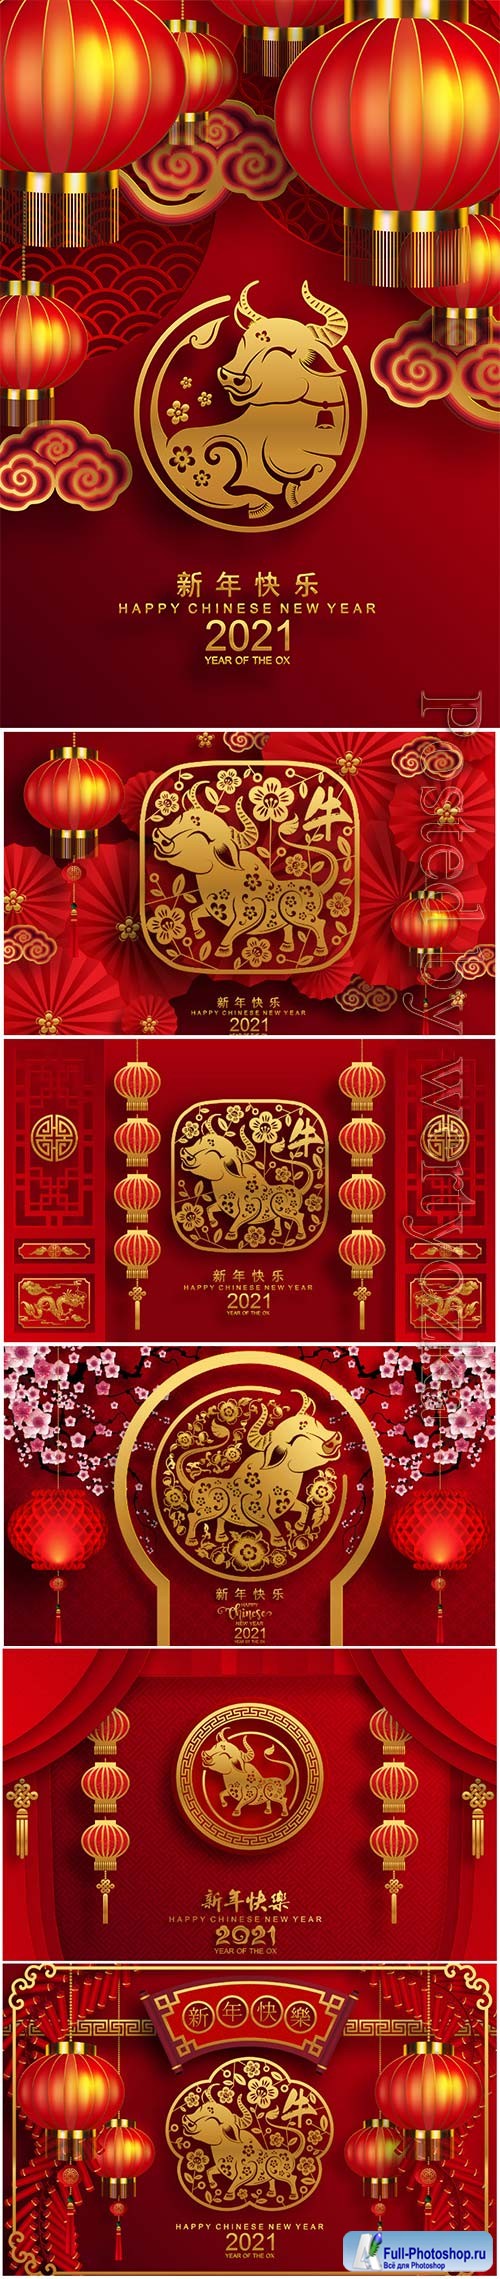 2021 Chinese new year greeting vector card